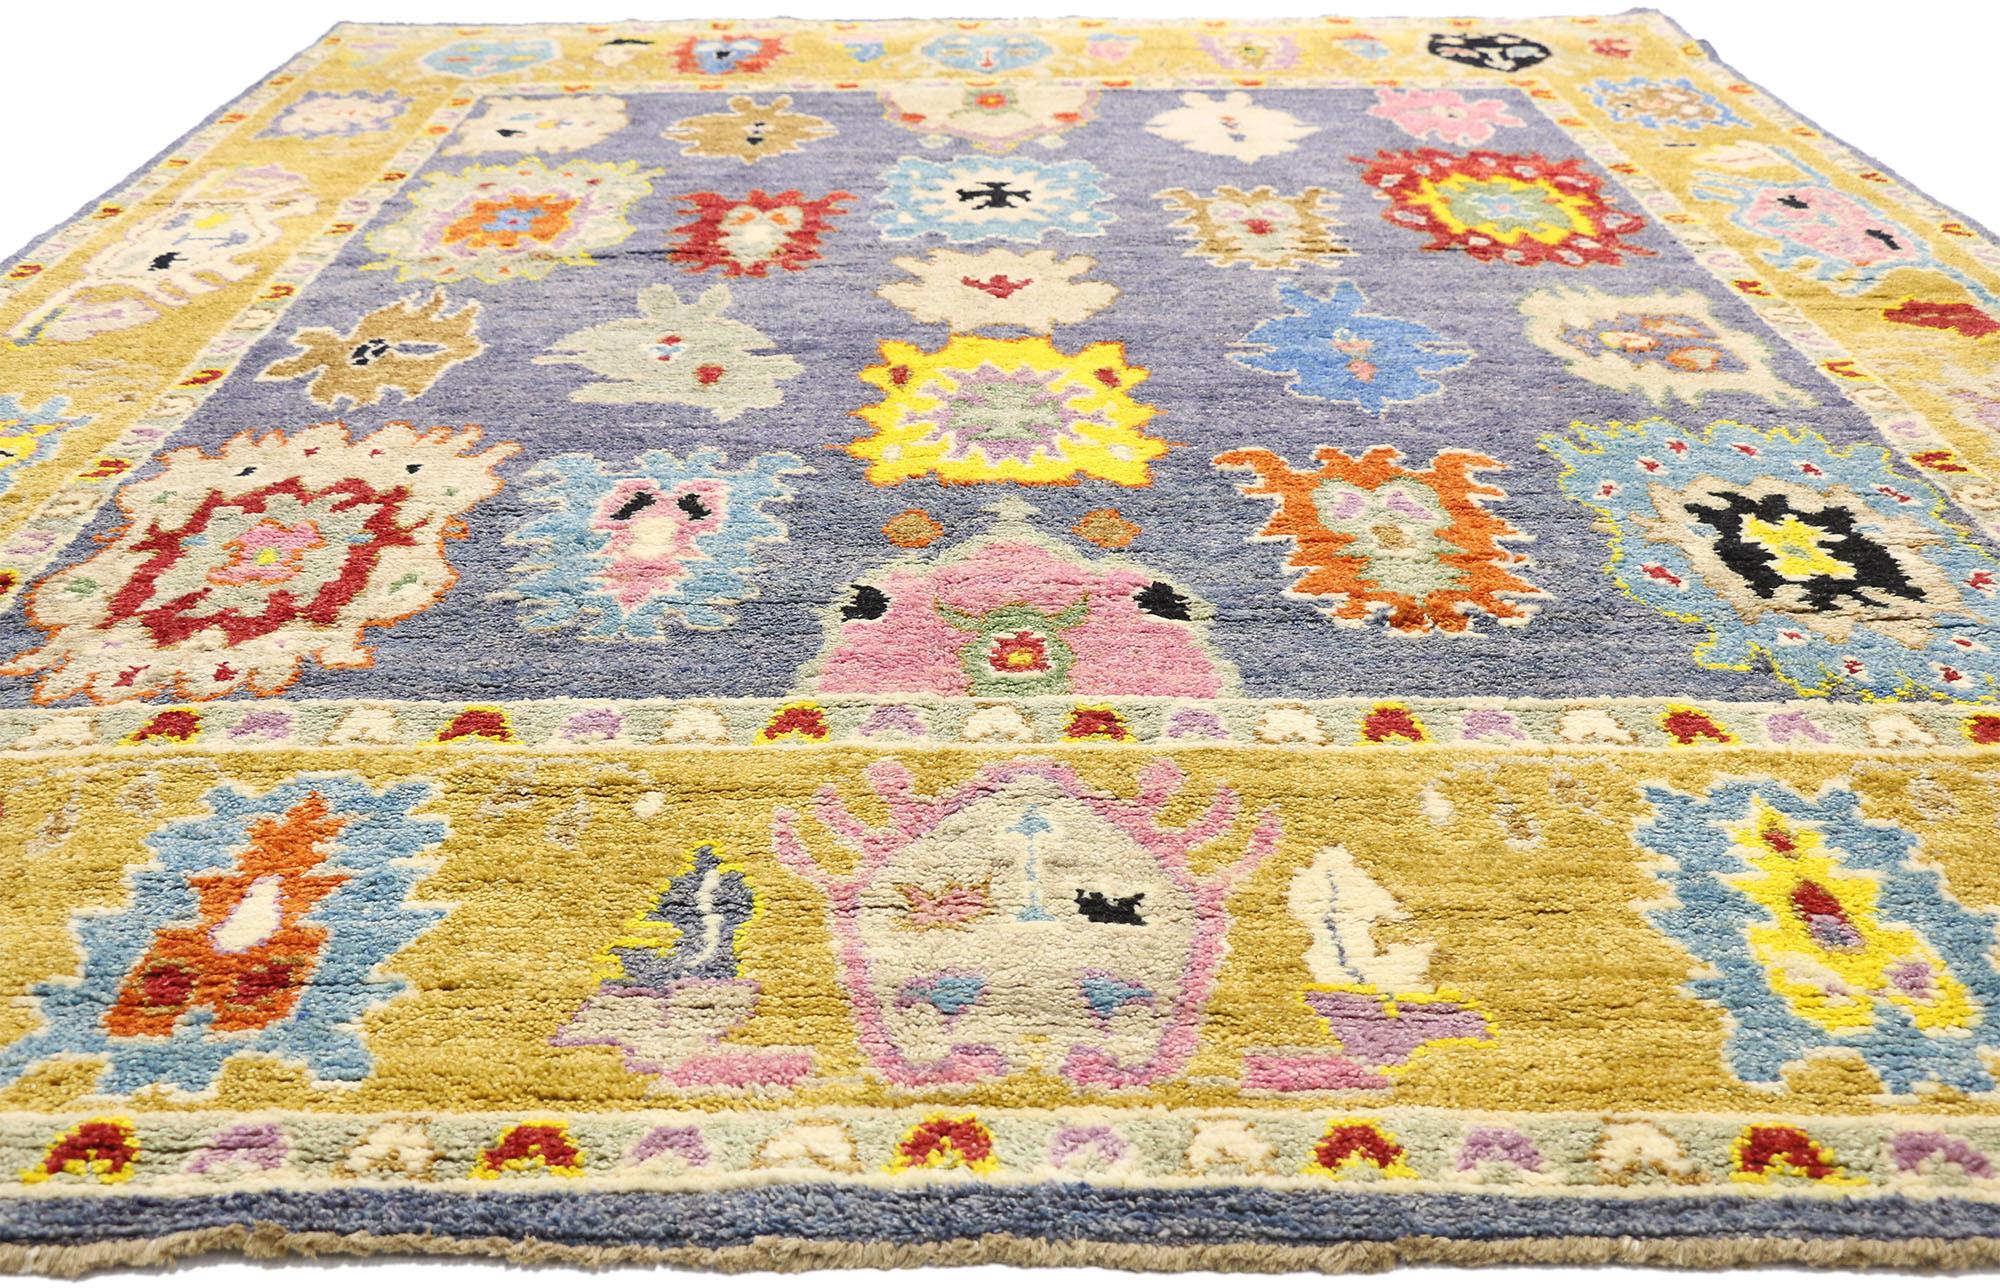 Pakistani Contemporary Moroccan Area Rug with Oushak Design Pattern and Memphis Style